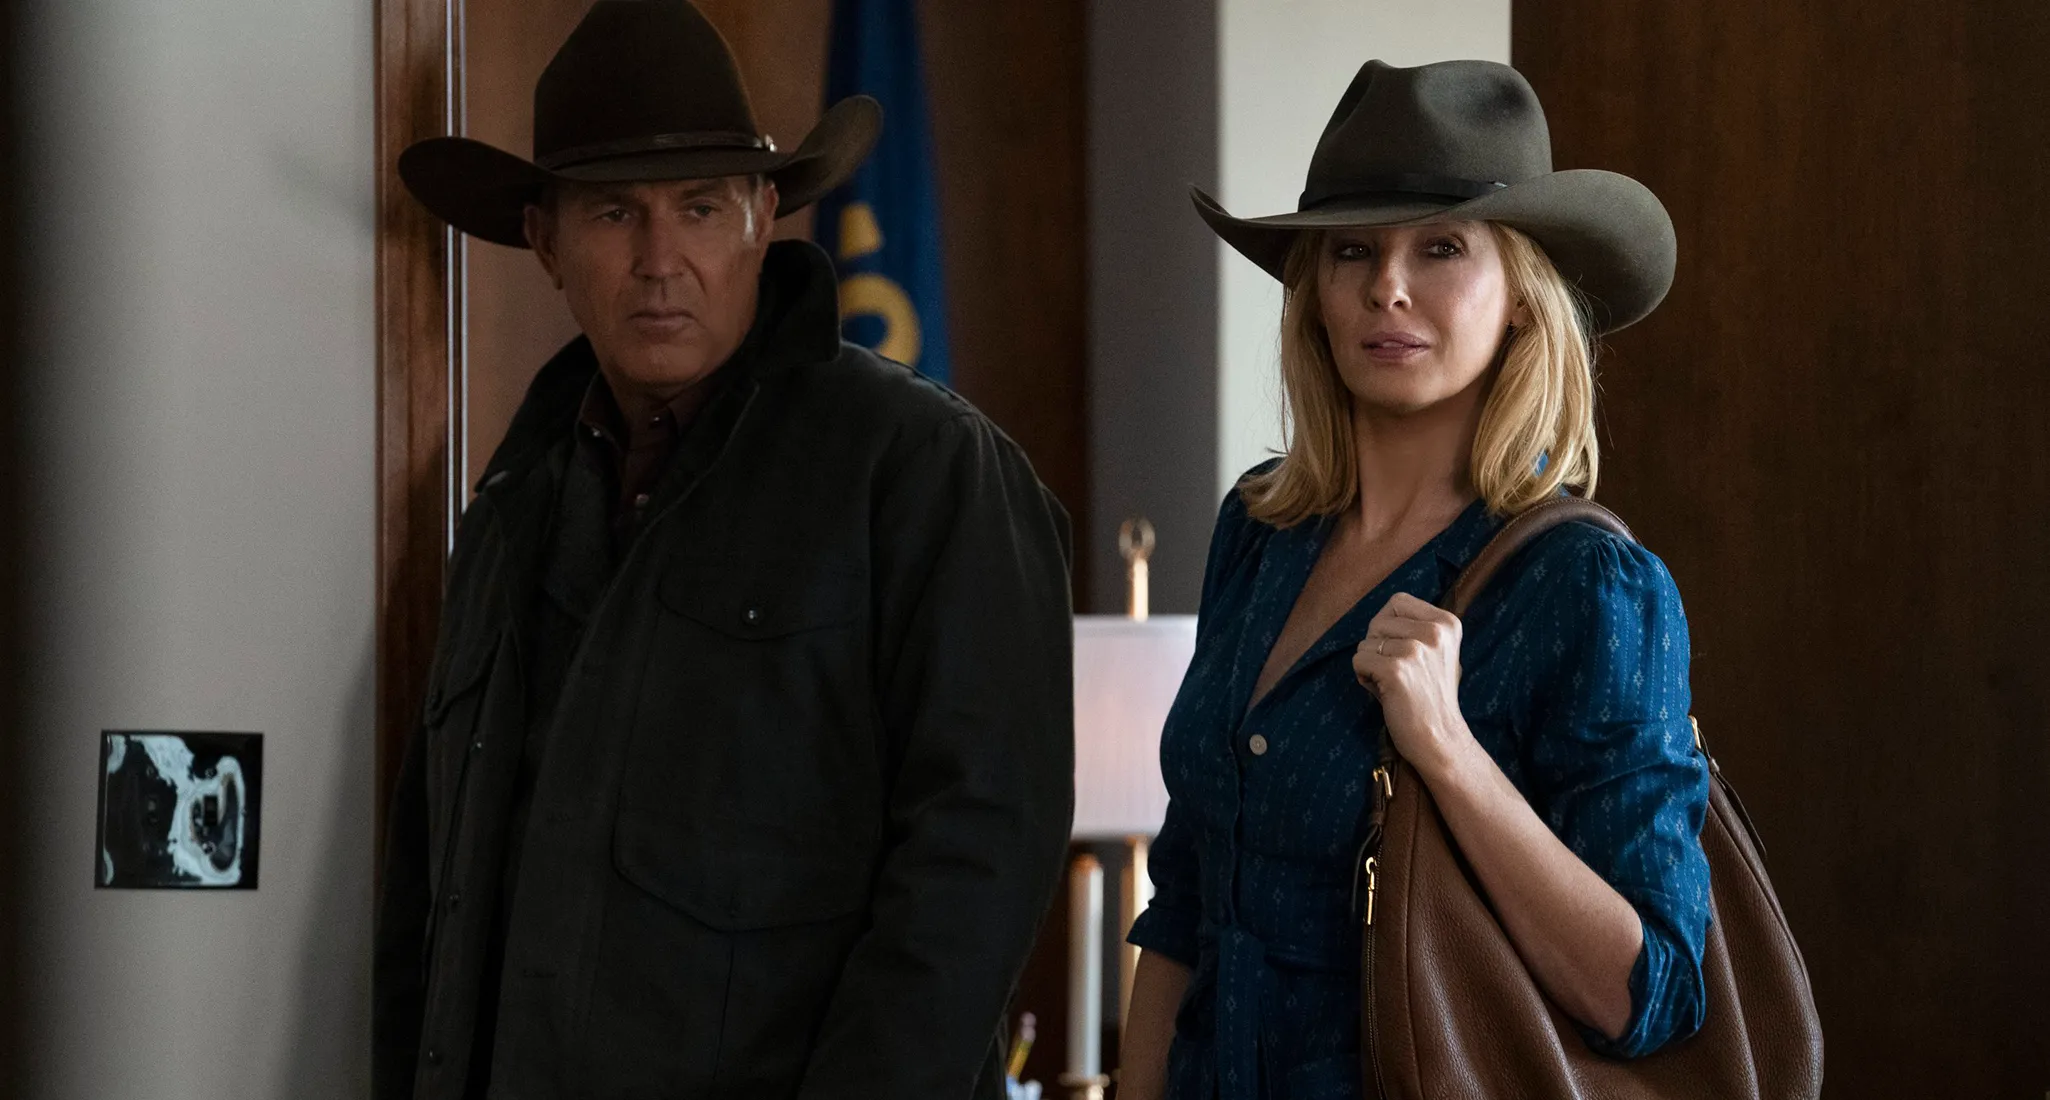 Exciting Update Yellowstone's Season 5 Part 2 Sets Record for Longest Wait - What Fans Need to Know